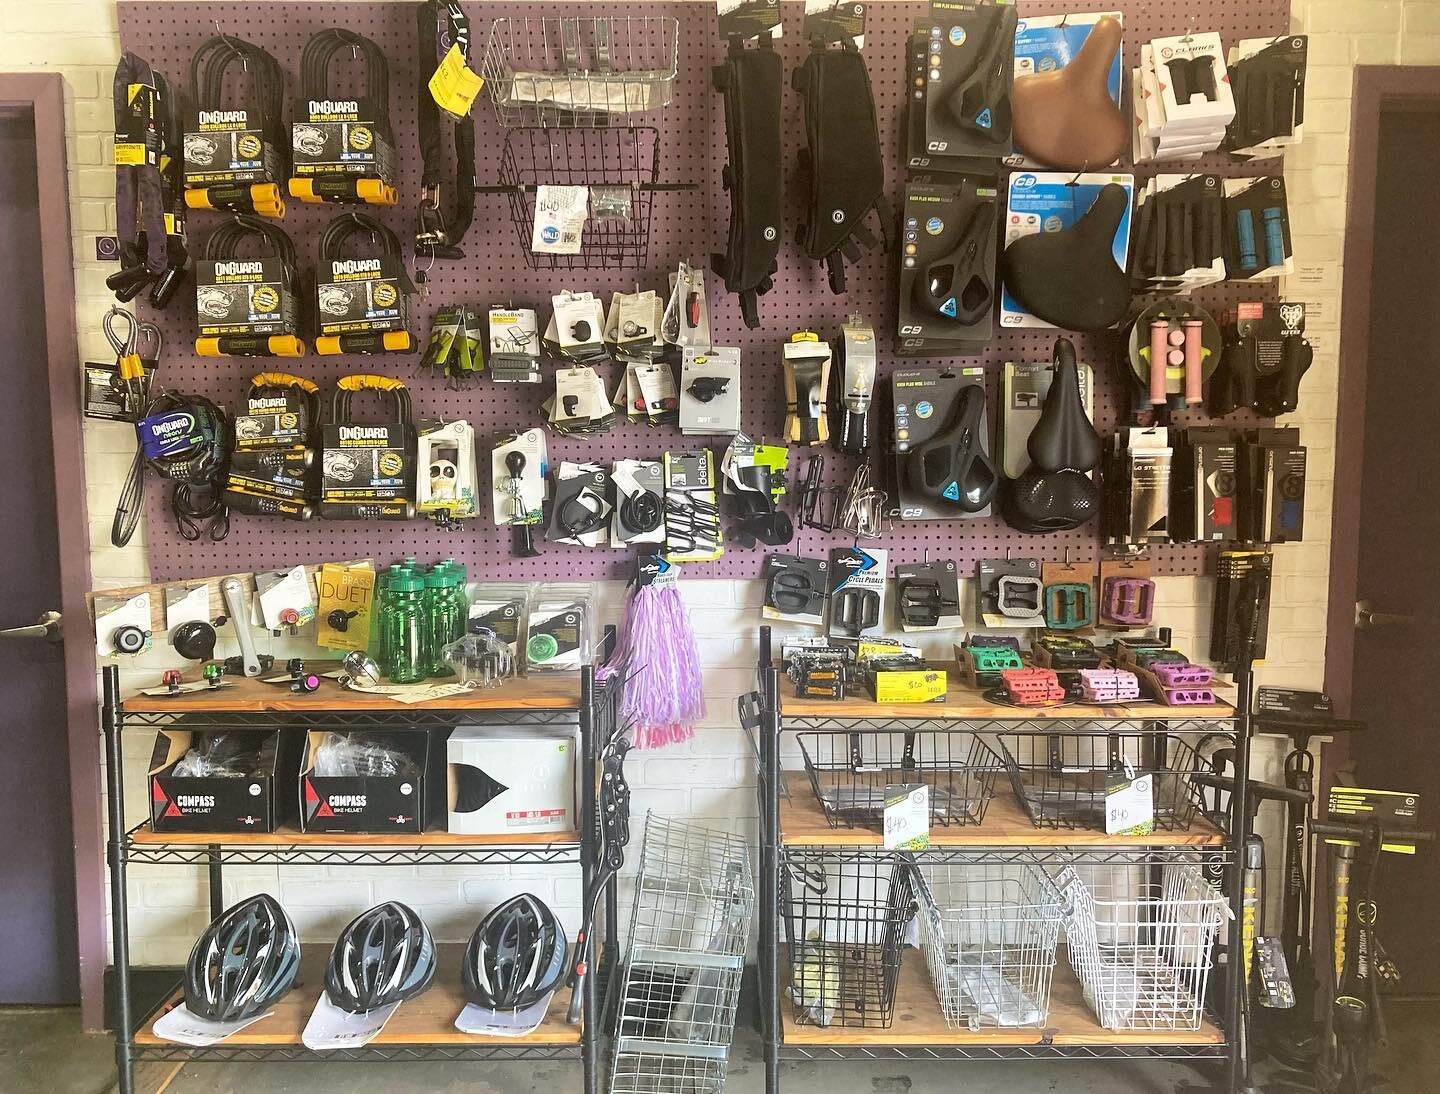 We&rsquo;ve got you covered for darn near most any accessory you may need for your bike... come get equipped!
.
.
.
.
#bike #bikes #bikeshop #neworleans #nola #marigny #bikeparts #propane #propaneaccessories #cutecats